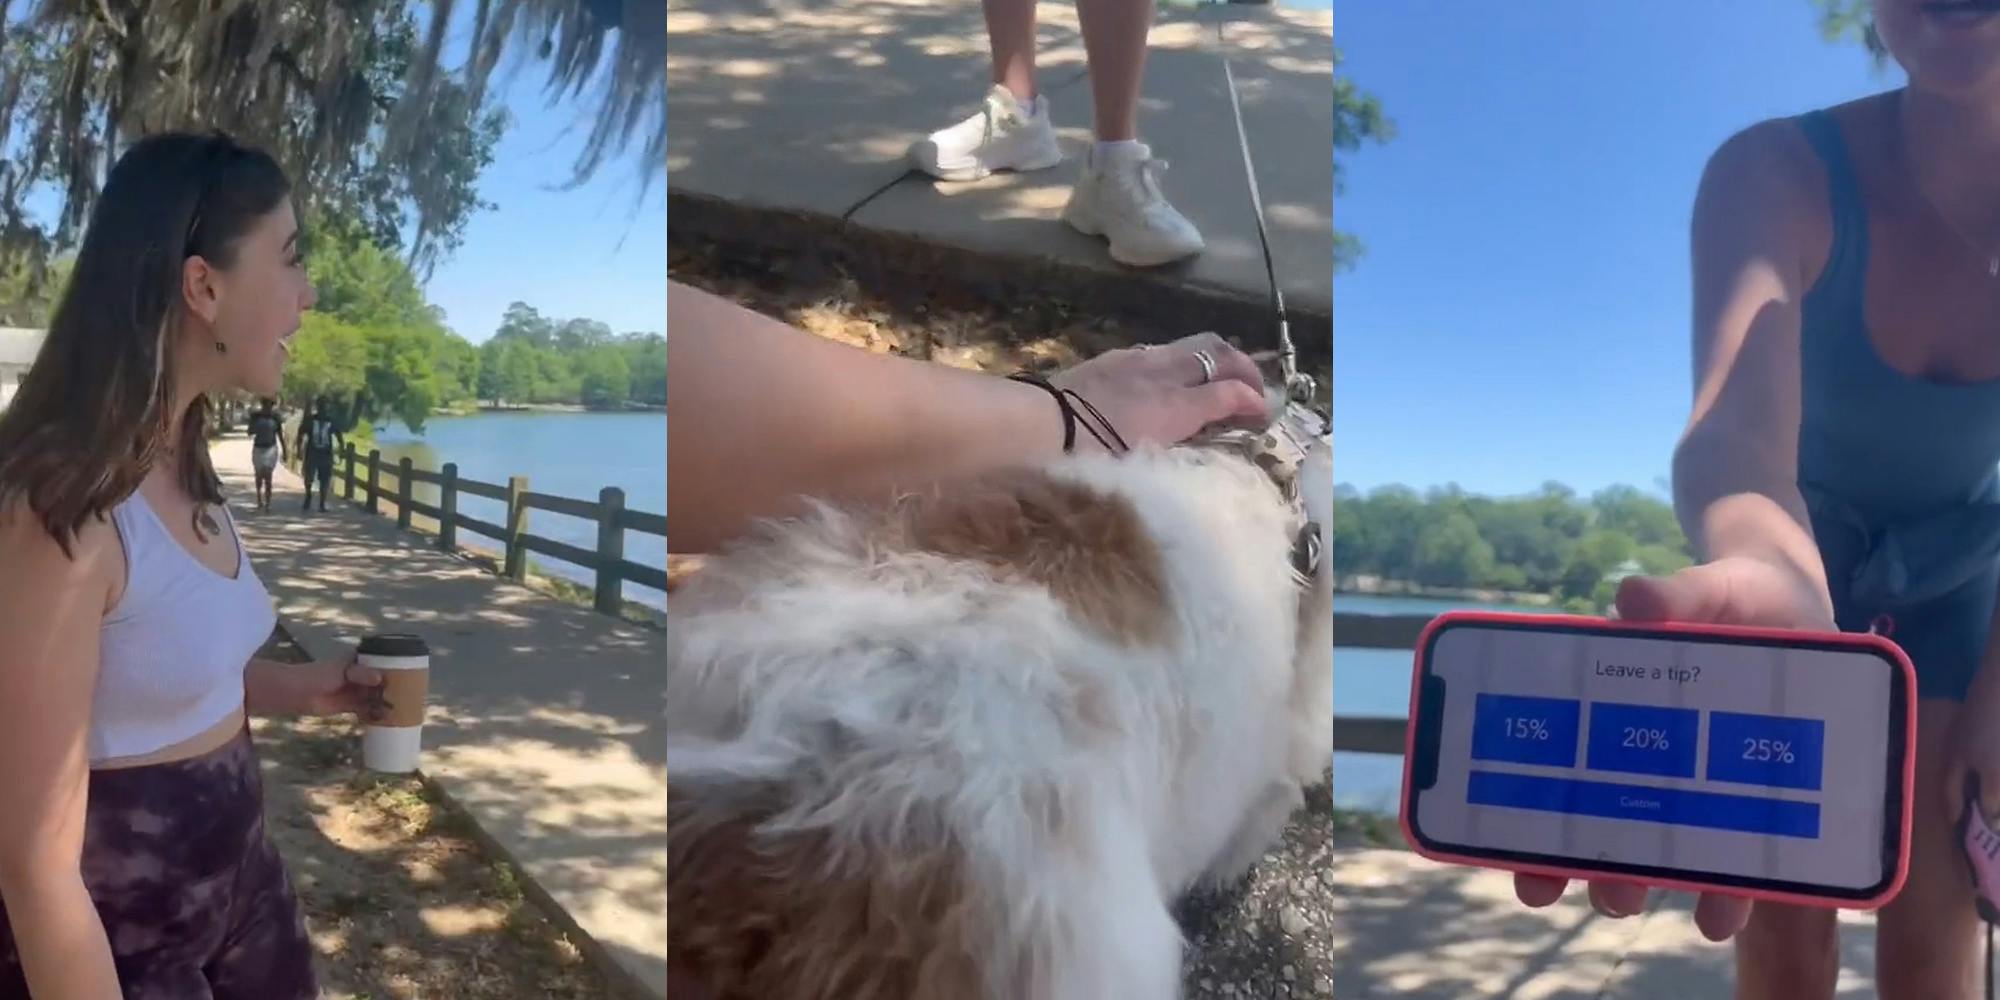 person outside speaking to stranger at sidewalk (l) person petting dog on leash outside (c) person on sidewalk outside holding phone with "leave a tip" on screen (r)